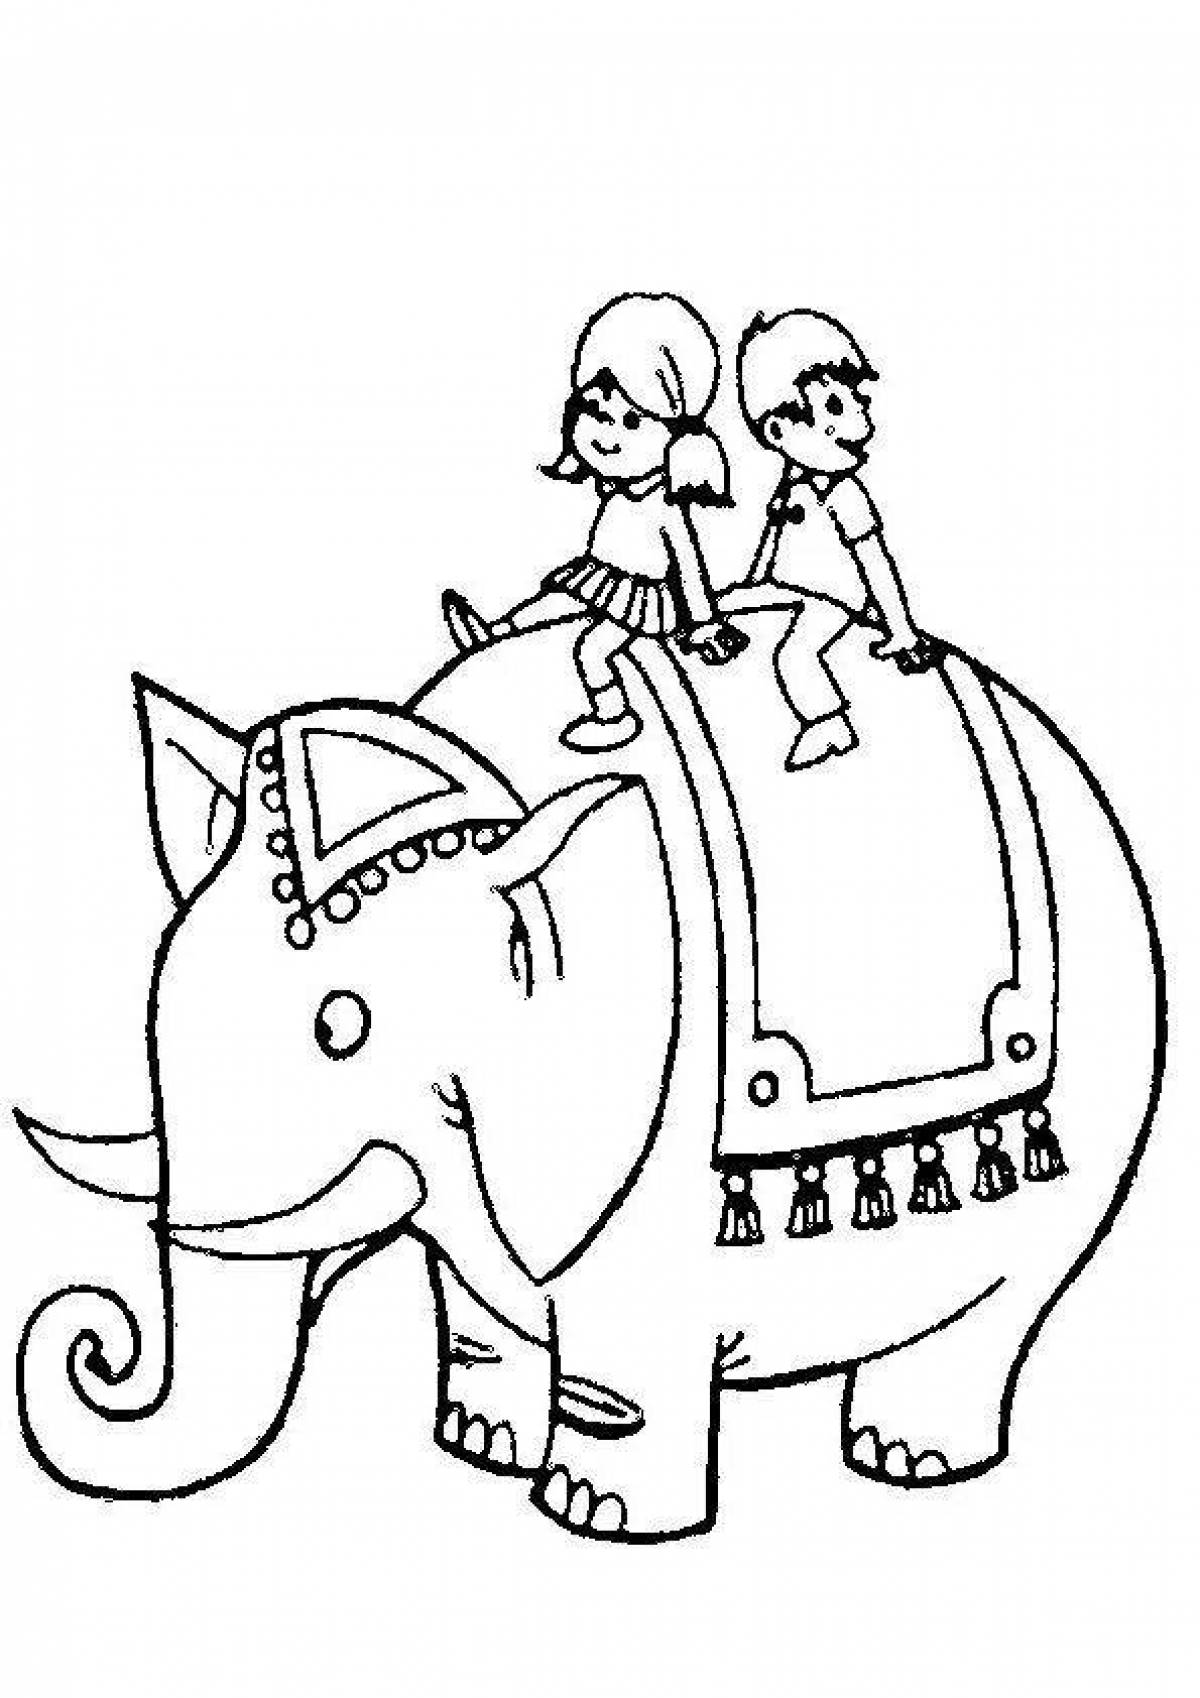 Luminous elephant and girl coloring book